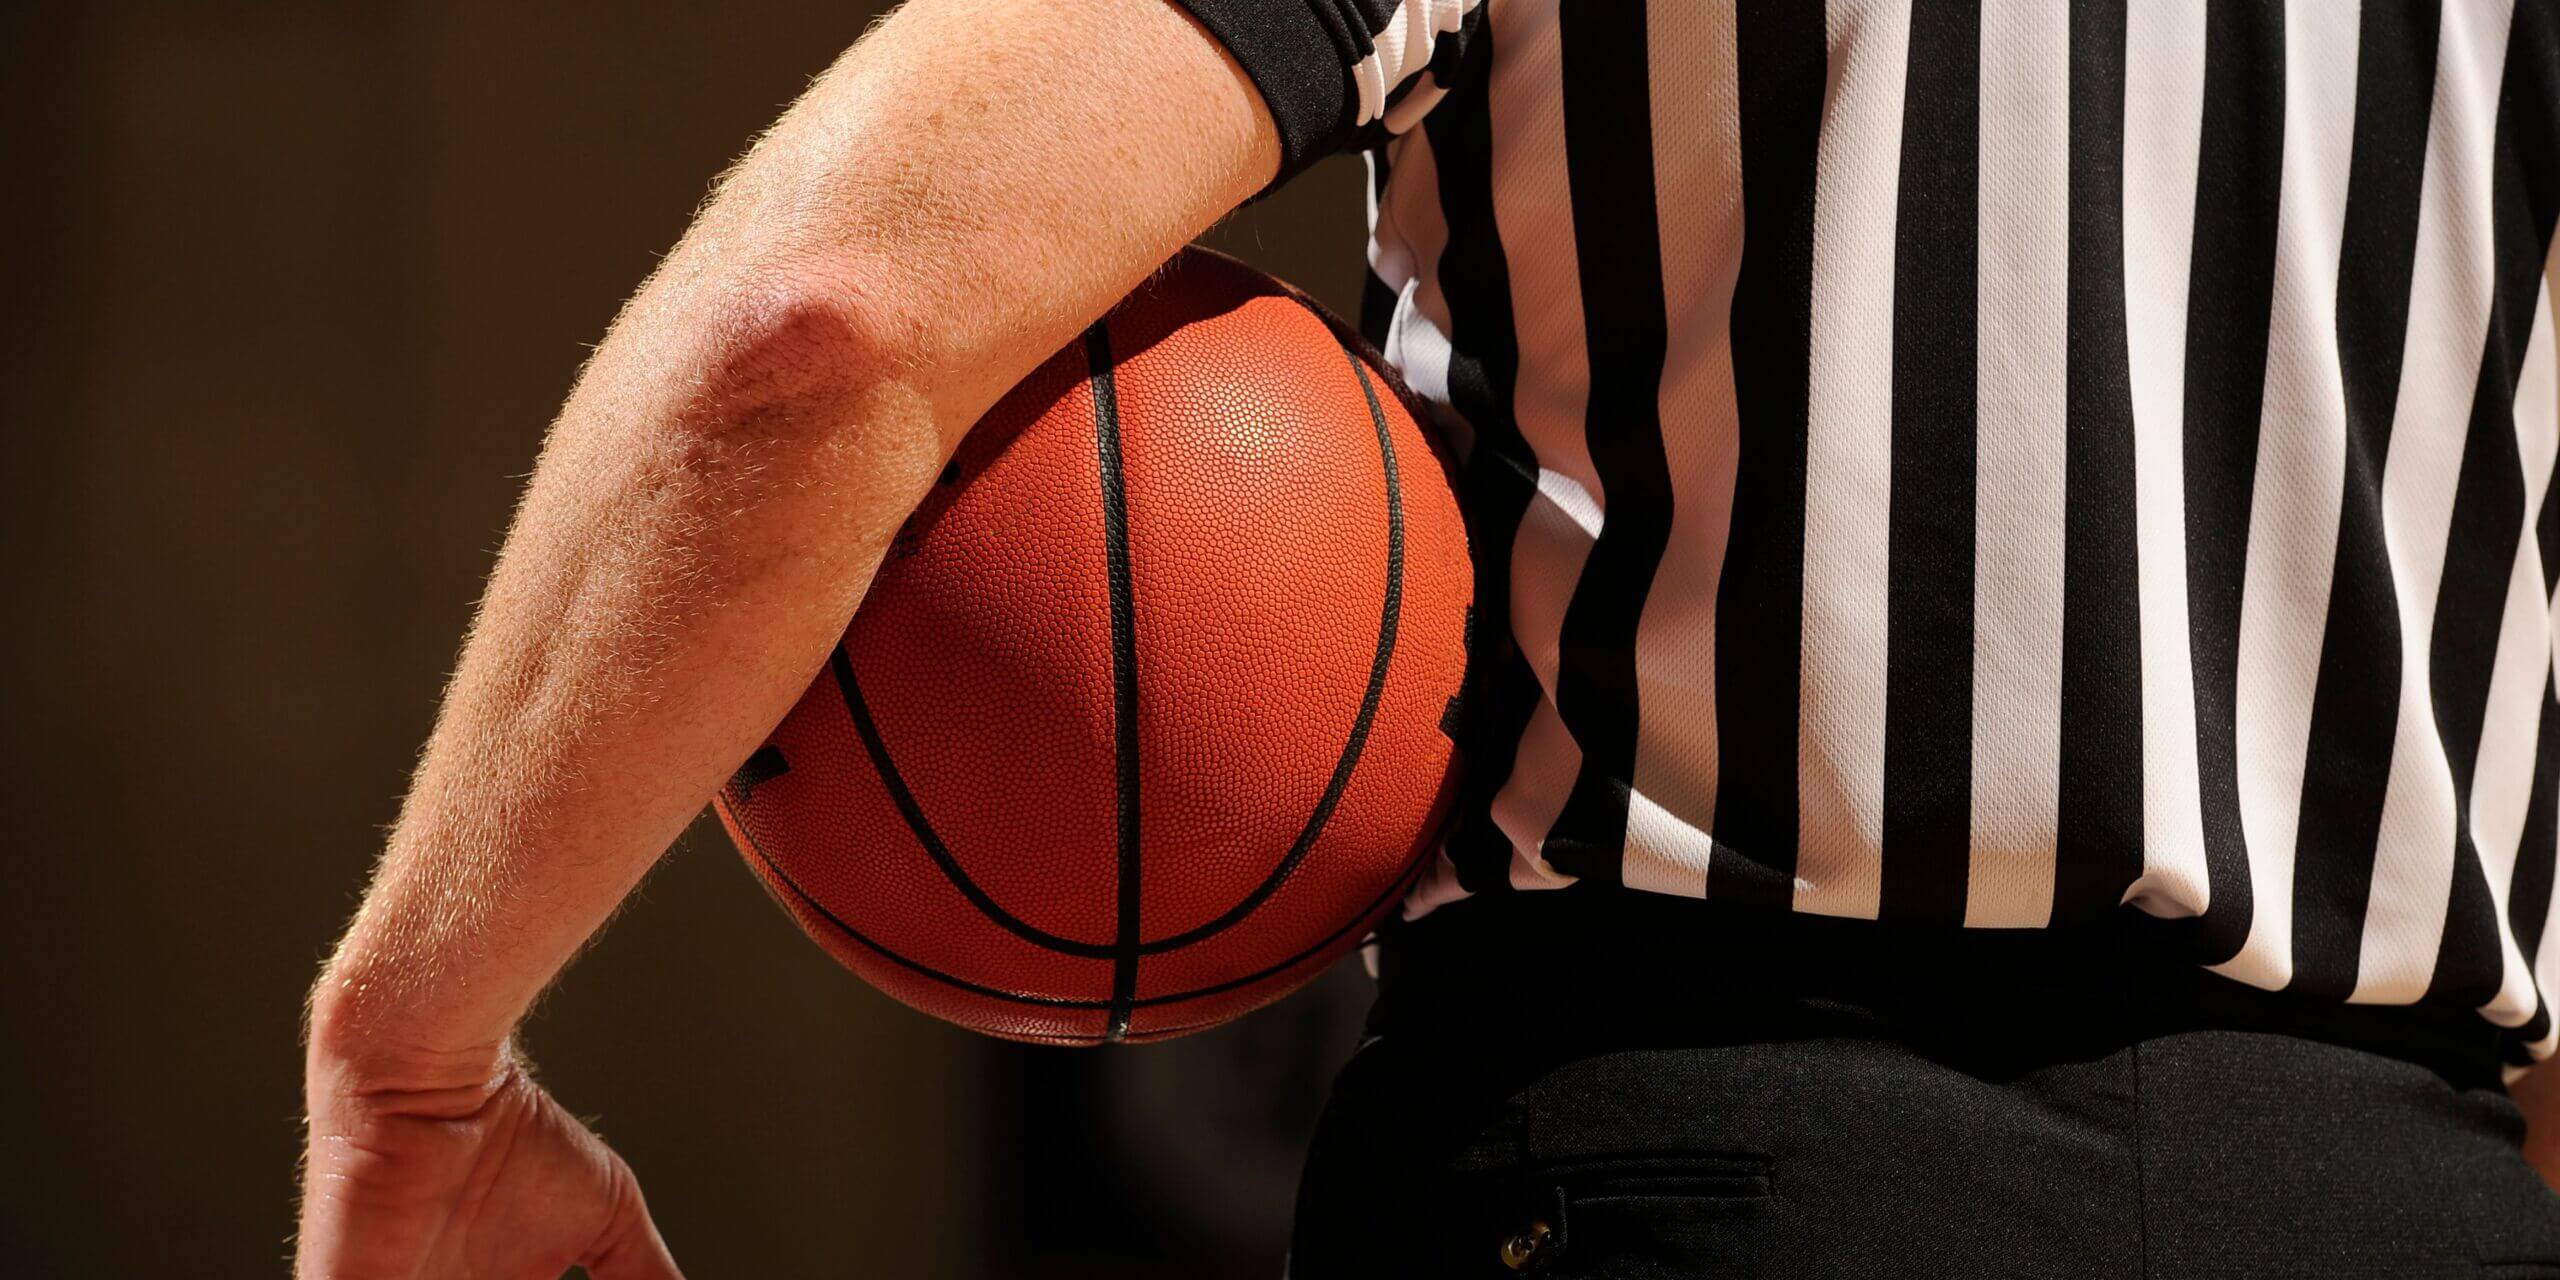 acc basketball referee assignments